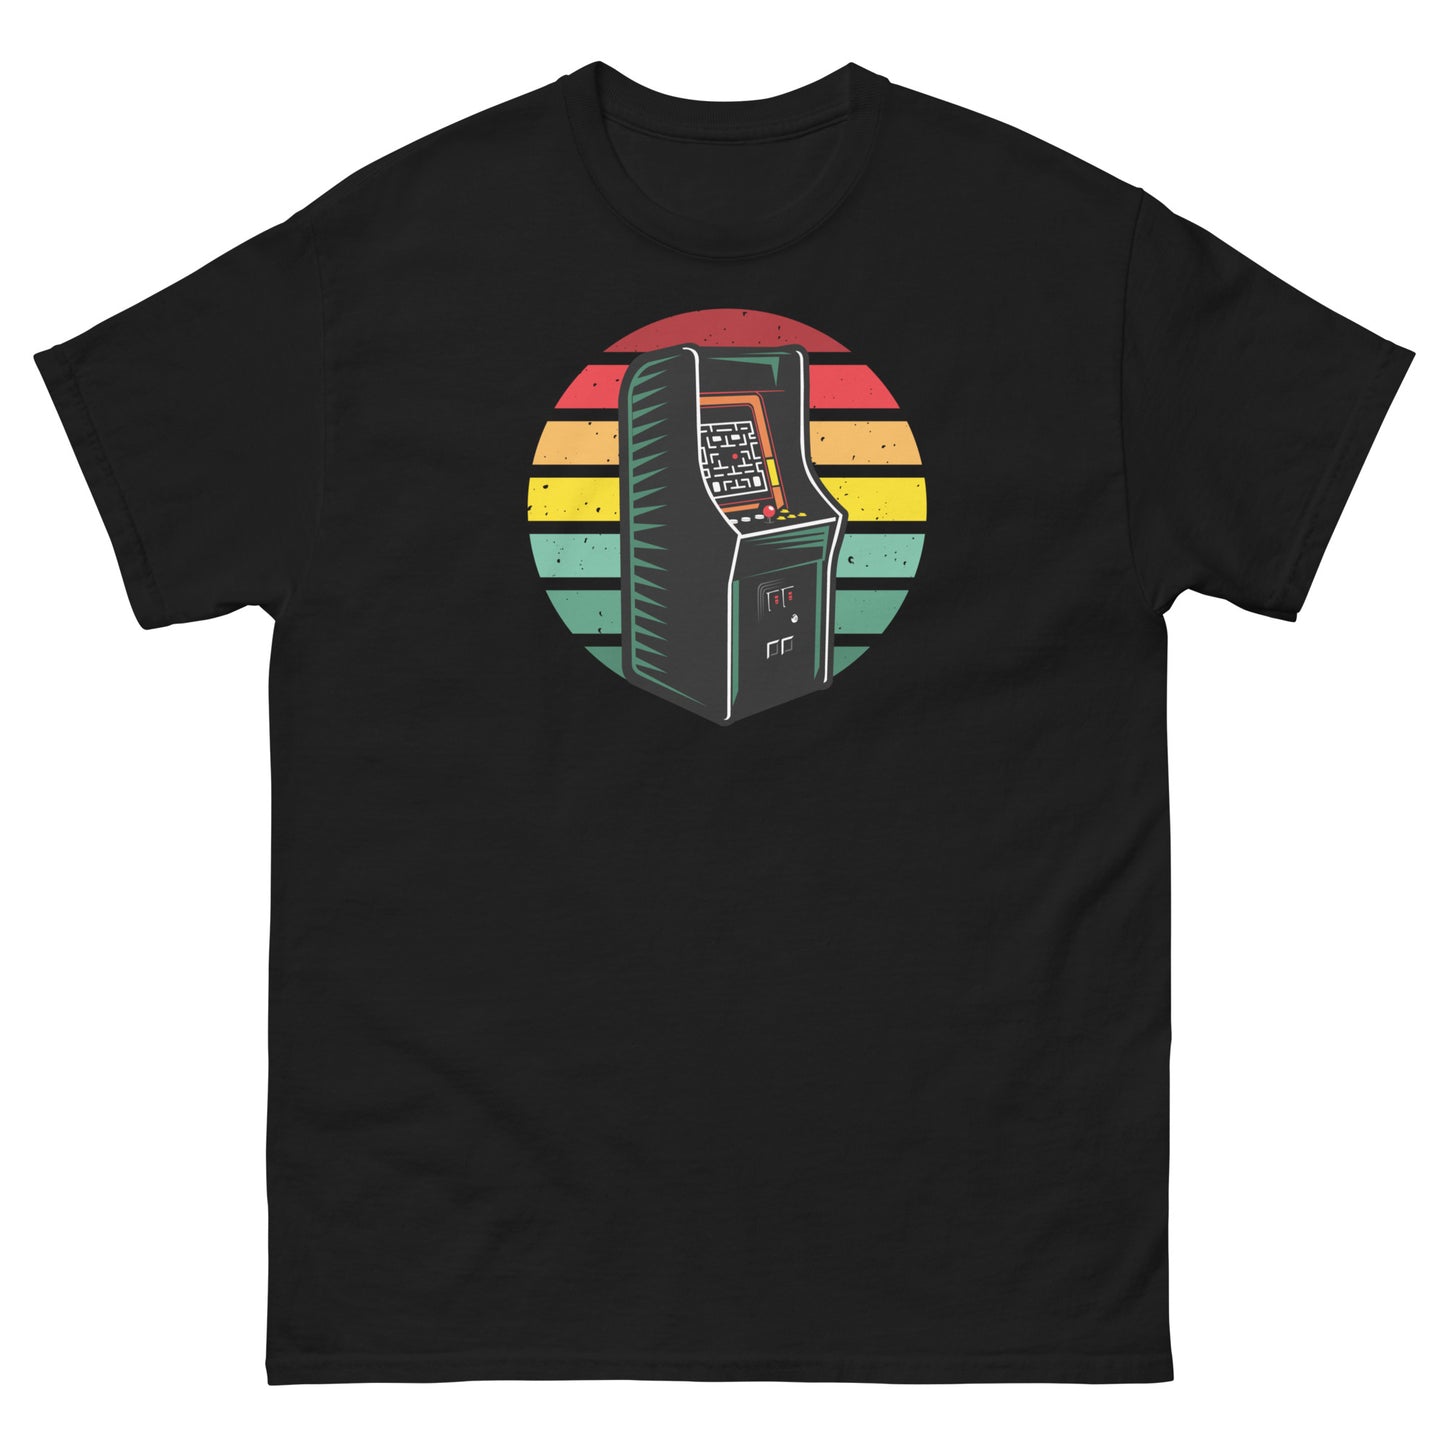 Ghostly Arcade Games Tee